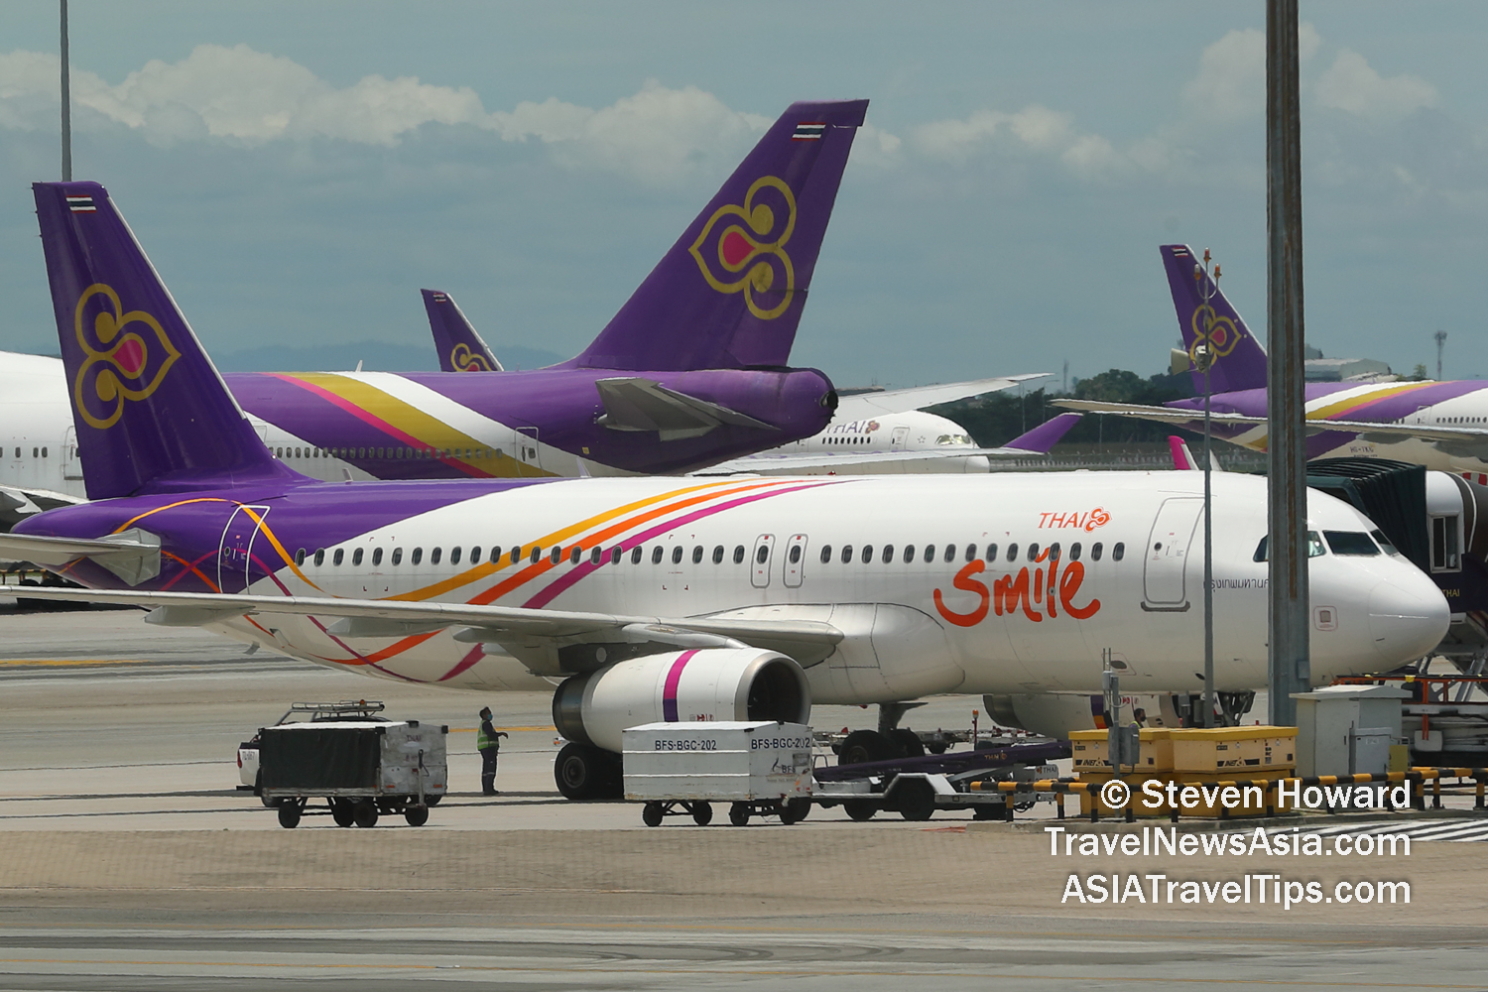 Thai Smile and Thai Airways Aicraft at BKK. Picture by Steven Howard of TravelNewsAsia.com Click to enlarge.